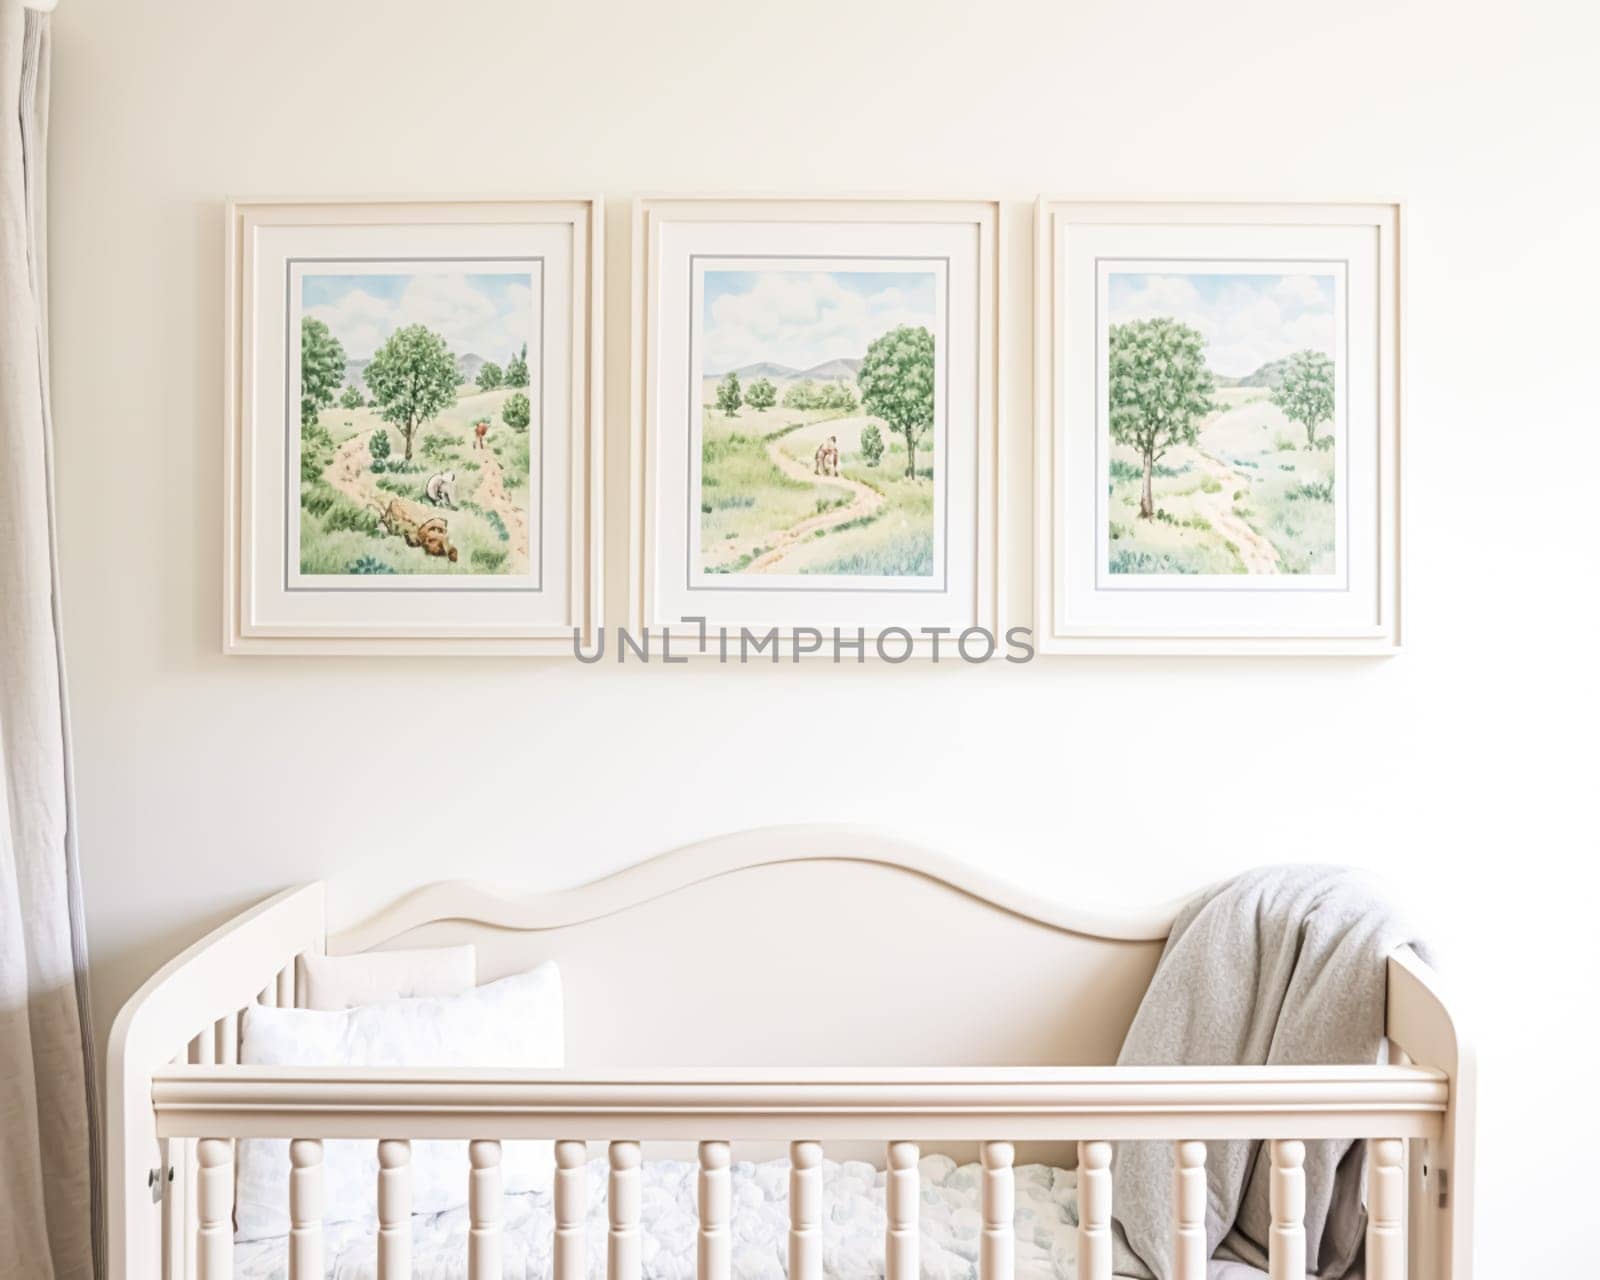 Nursery gallery wall, home decor and wall art, framed art in the English country cottage interior, room for diy printable artwork mockup and print shop idea